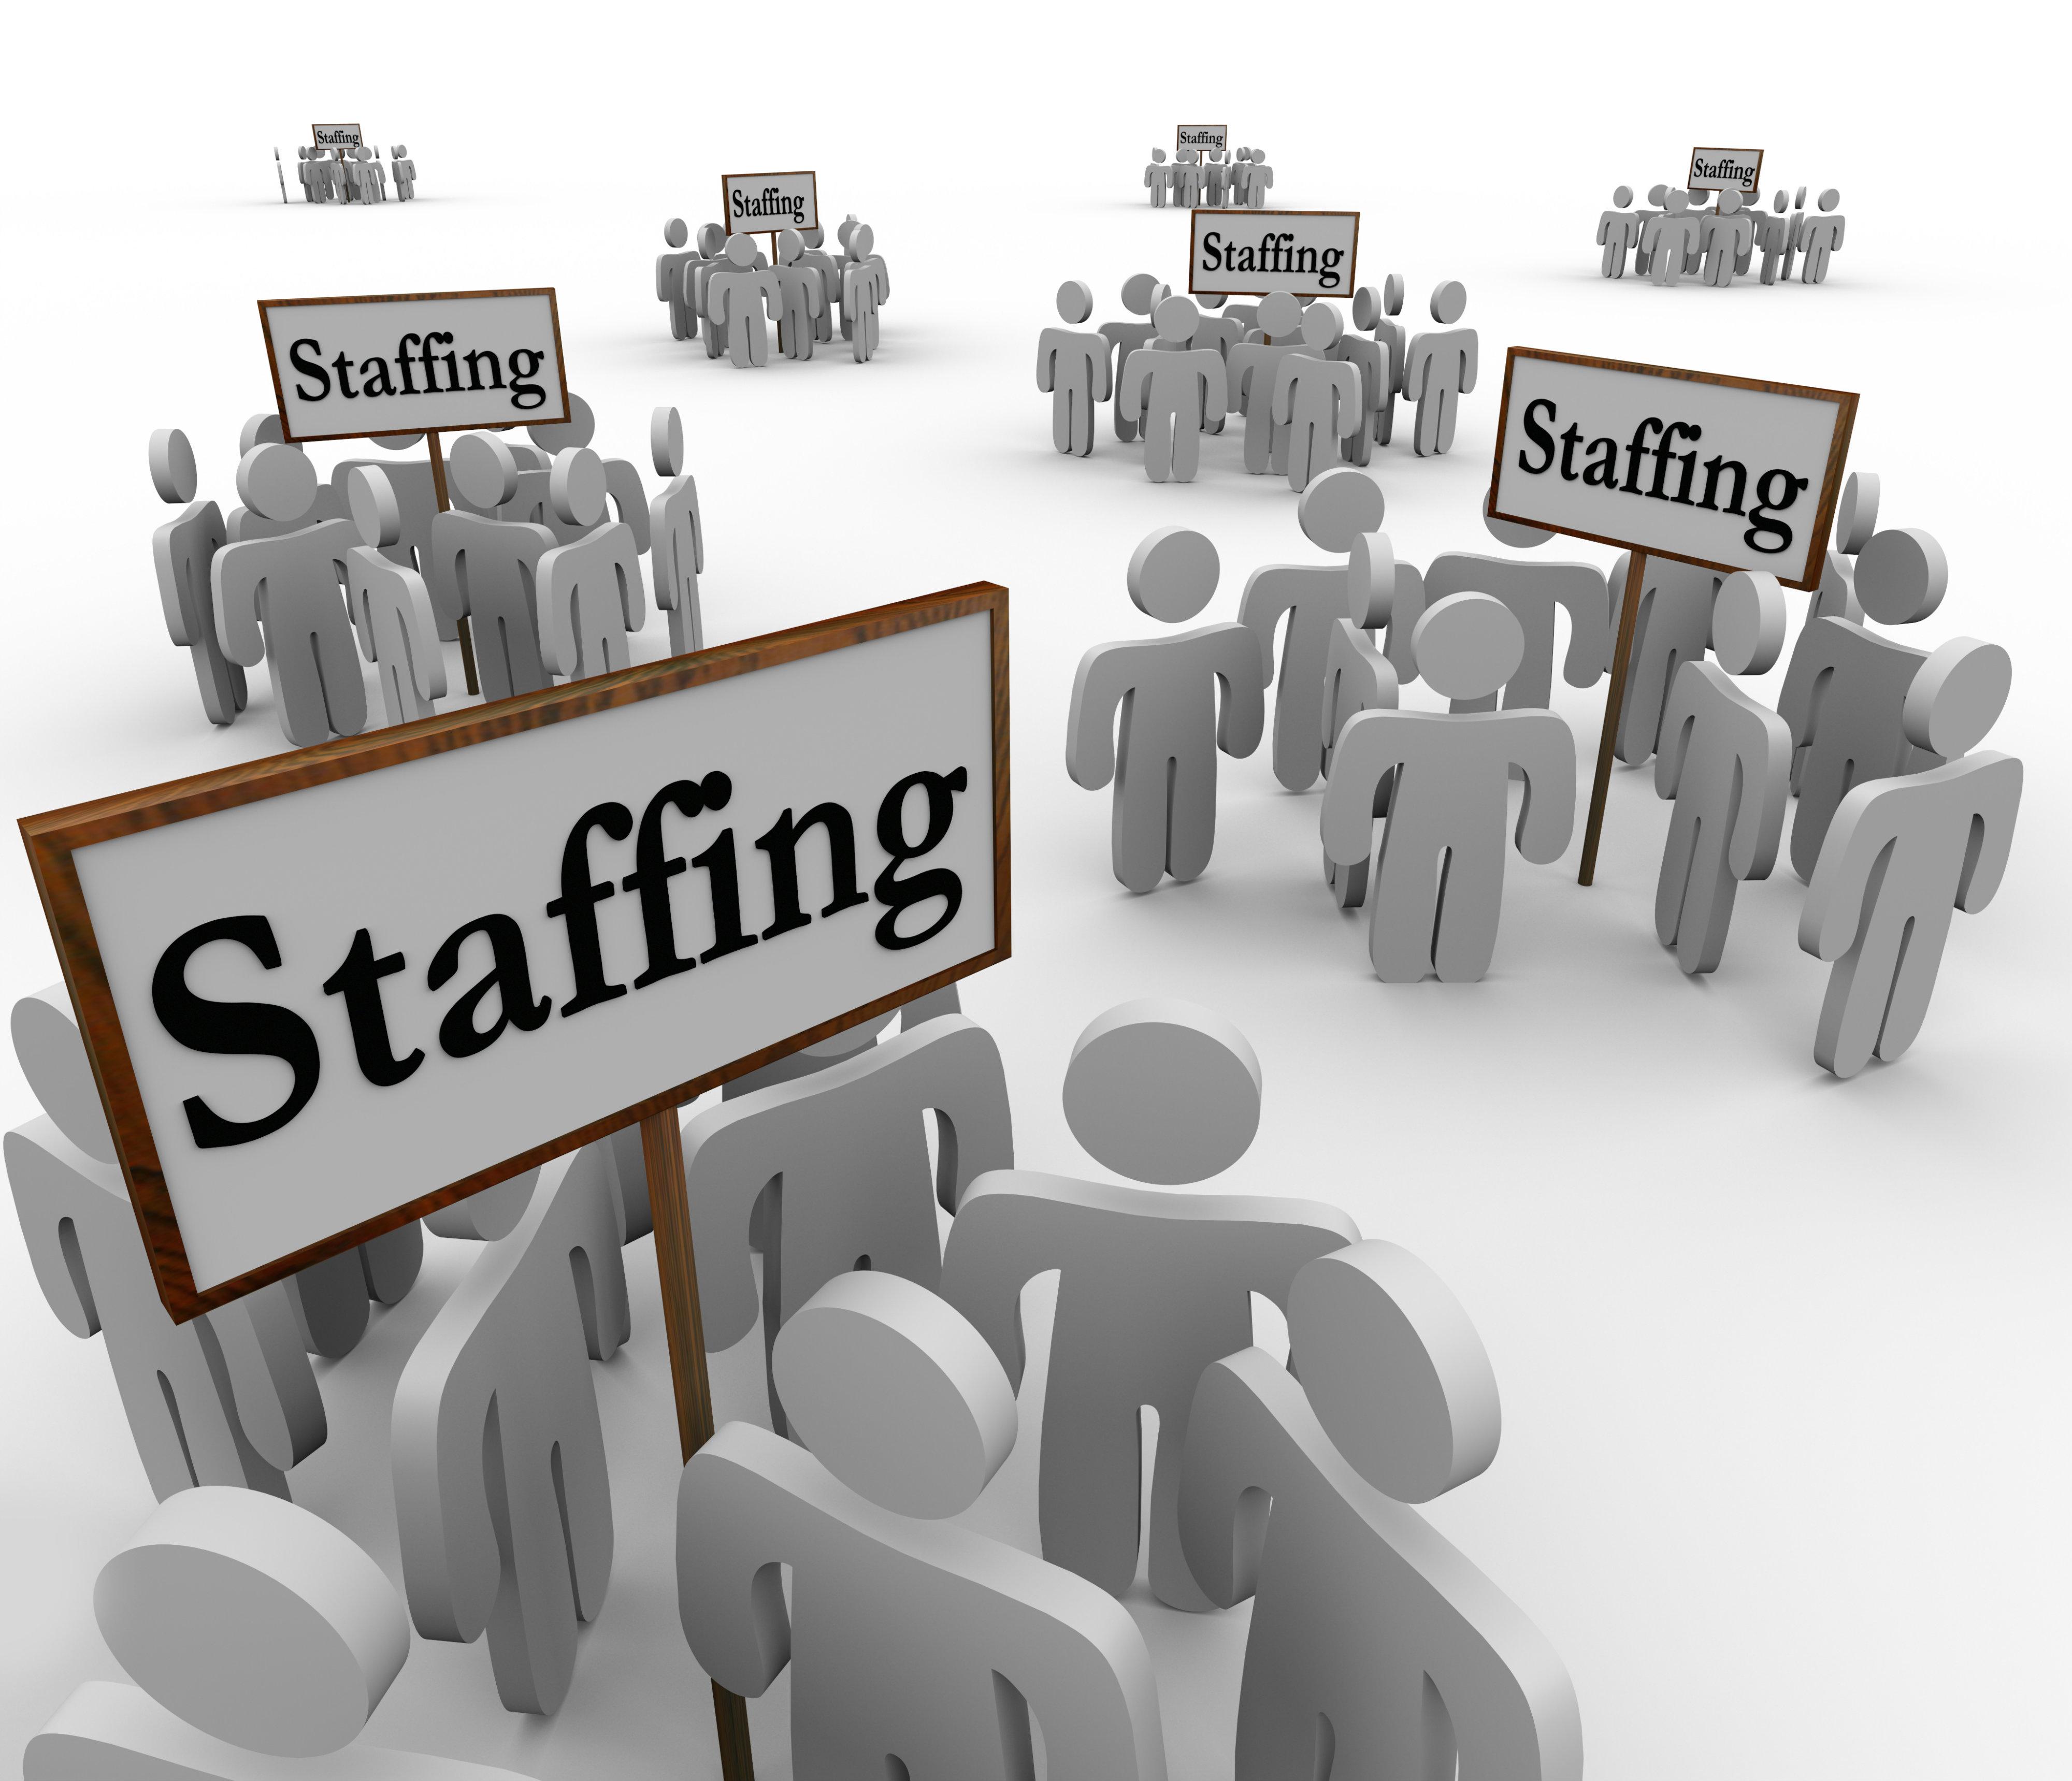 How to choose your staffing partner?